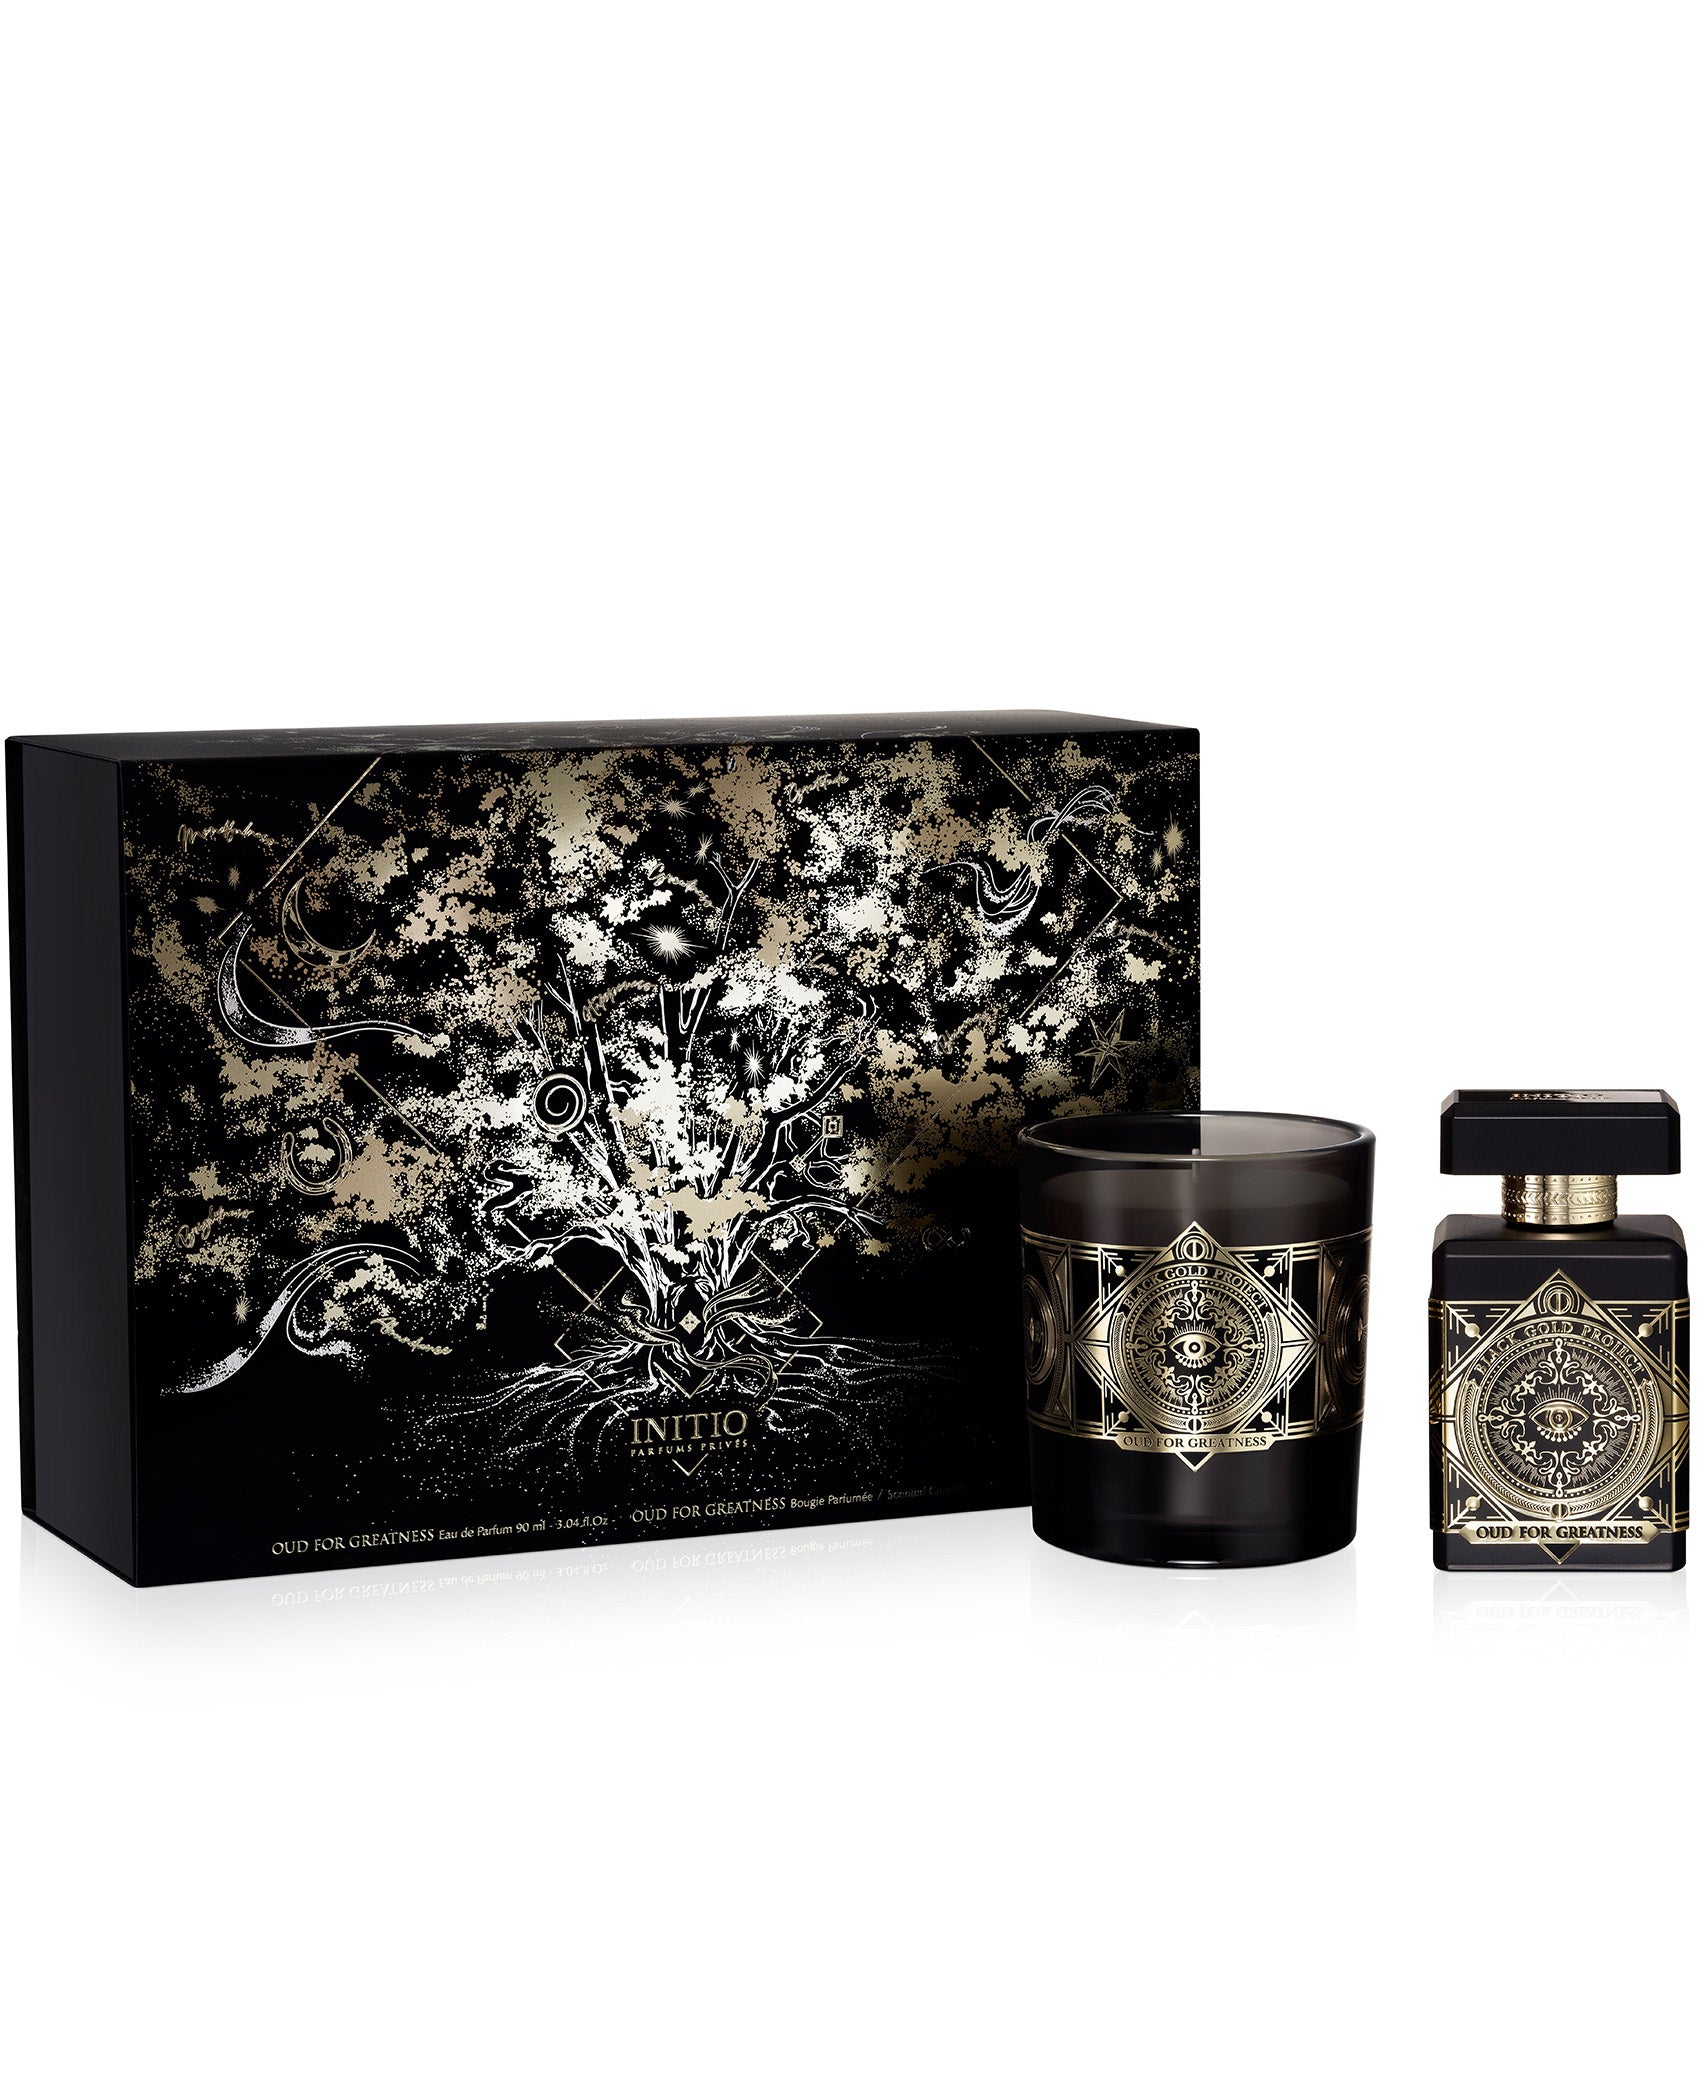 LIMITED – SET Privés EDITION GREATNESS OUD INITIO FOR US Parfums CANDLE